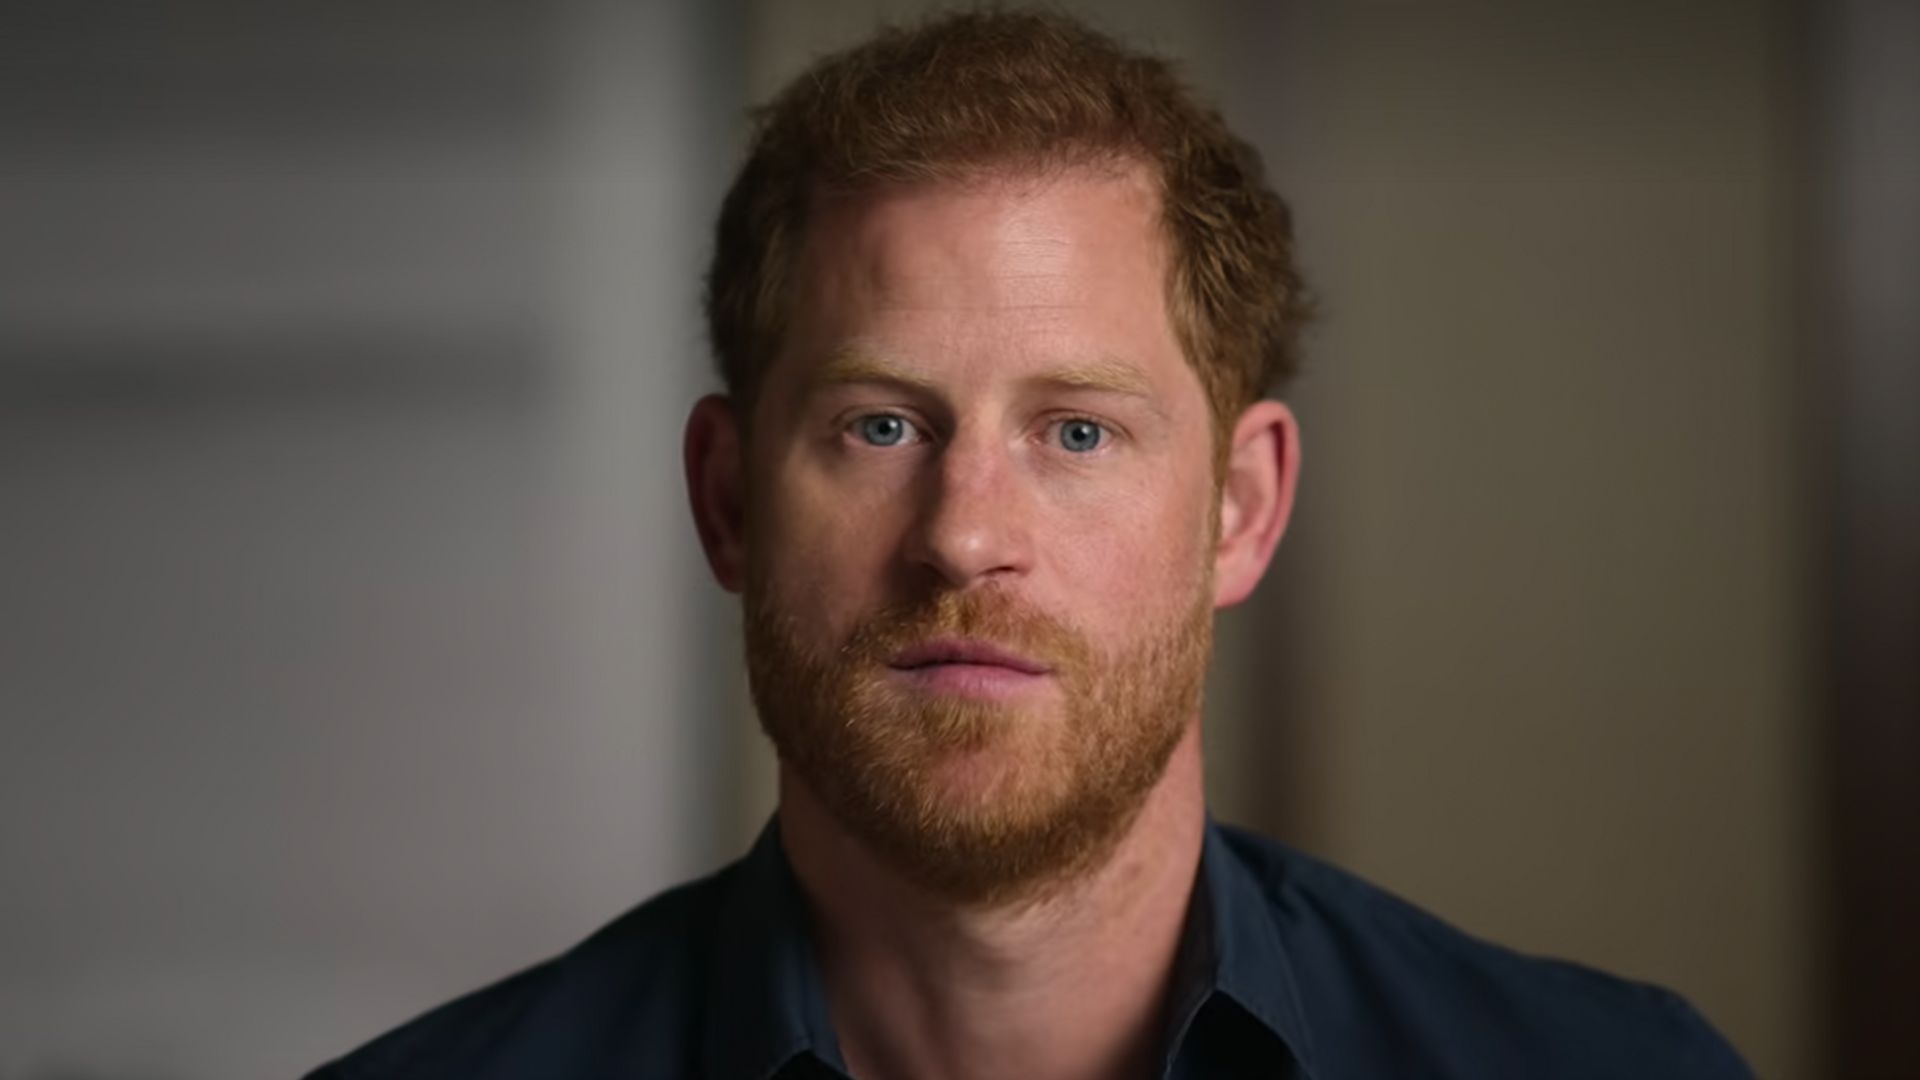 Prince Harry speaking to camera in Heart of Invictus